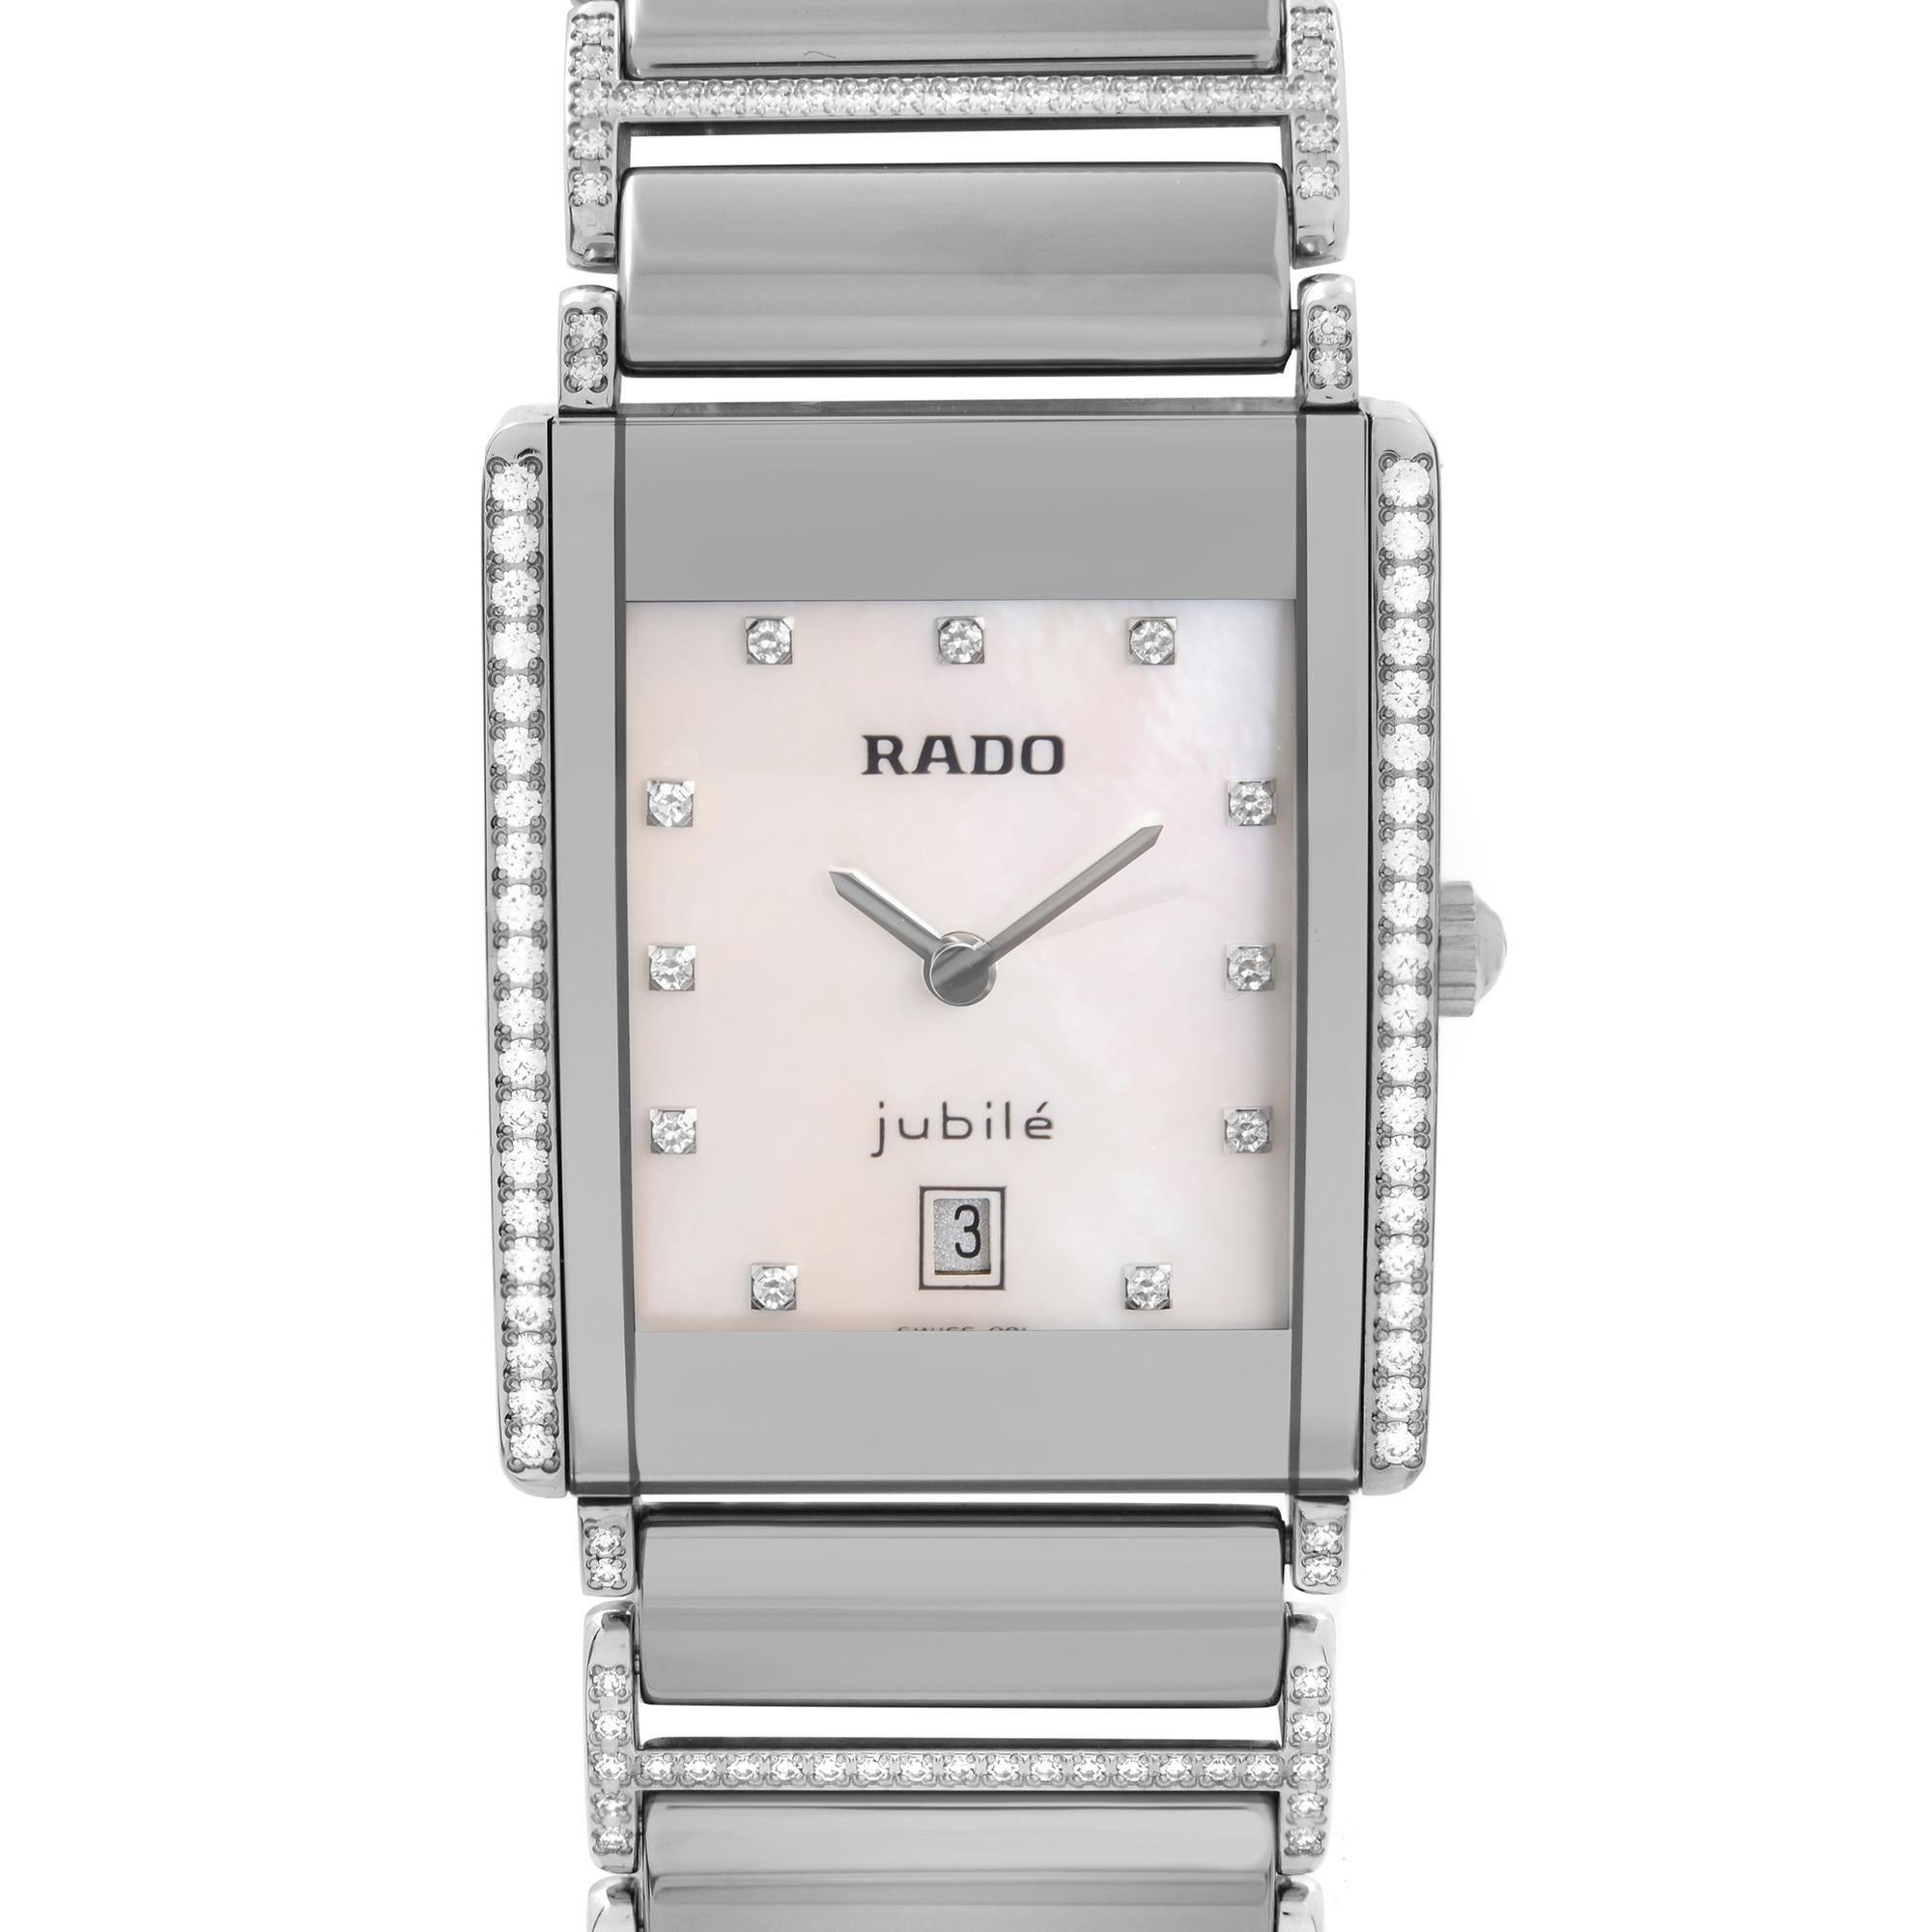 MSRP $9100. OUR PRICE $4200

Unworn Rado Integral Ladies Watch R20671919. This Beautiful Lady's Timepiece Is Powered by a Quartz (Battery) Movement and Features: Silvers-Tone Ceramic and Stainless Steel Case and Silvers-Tone Ceramic and Stainless